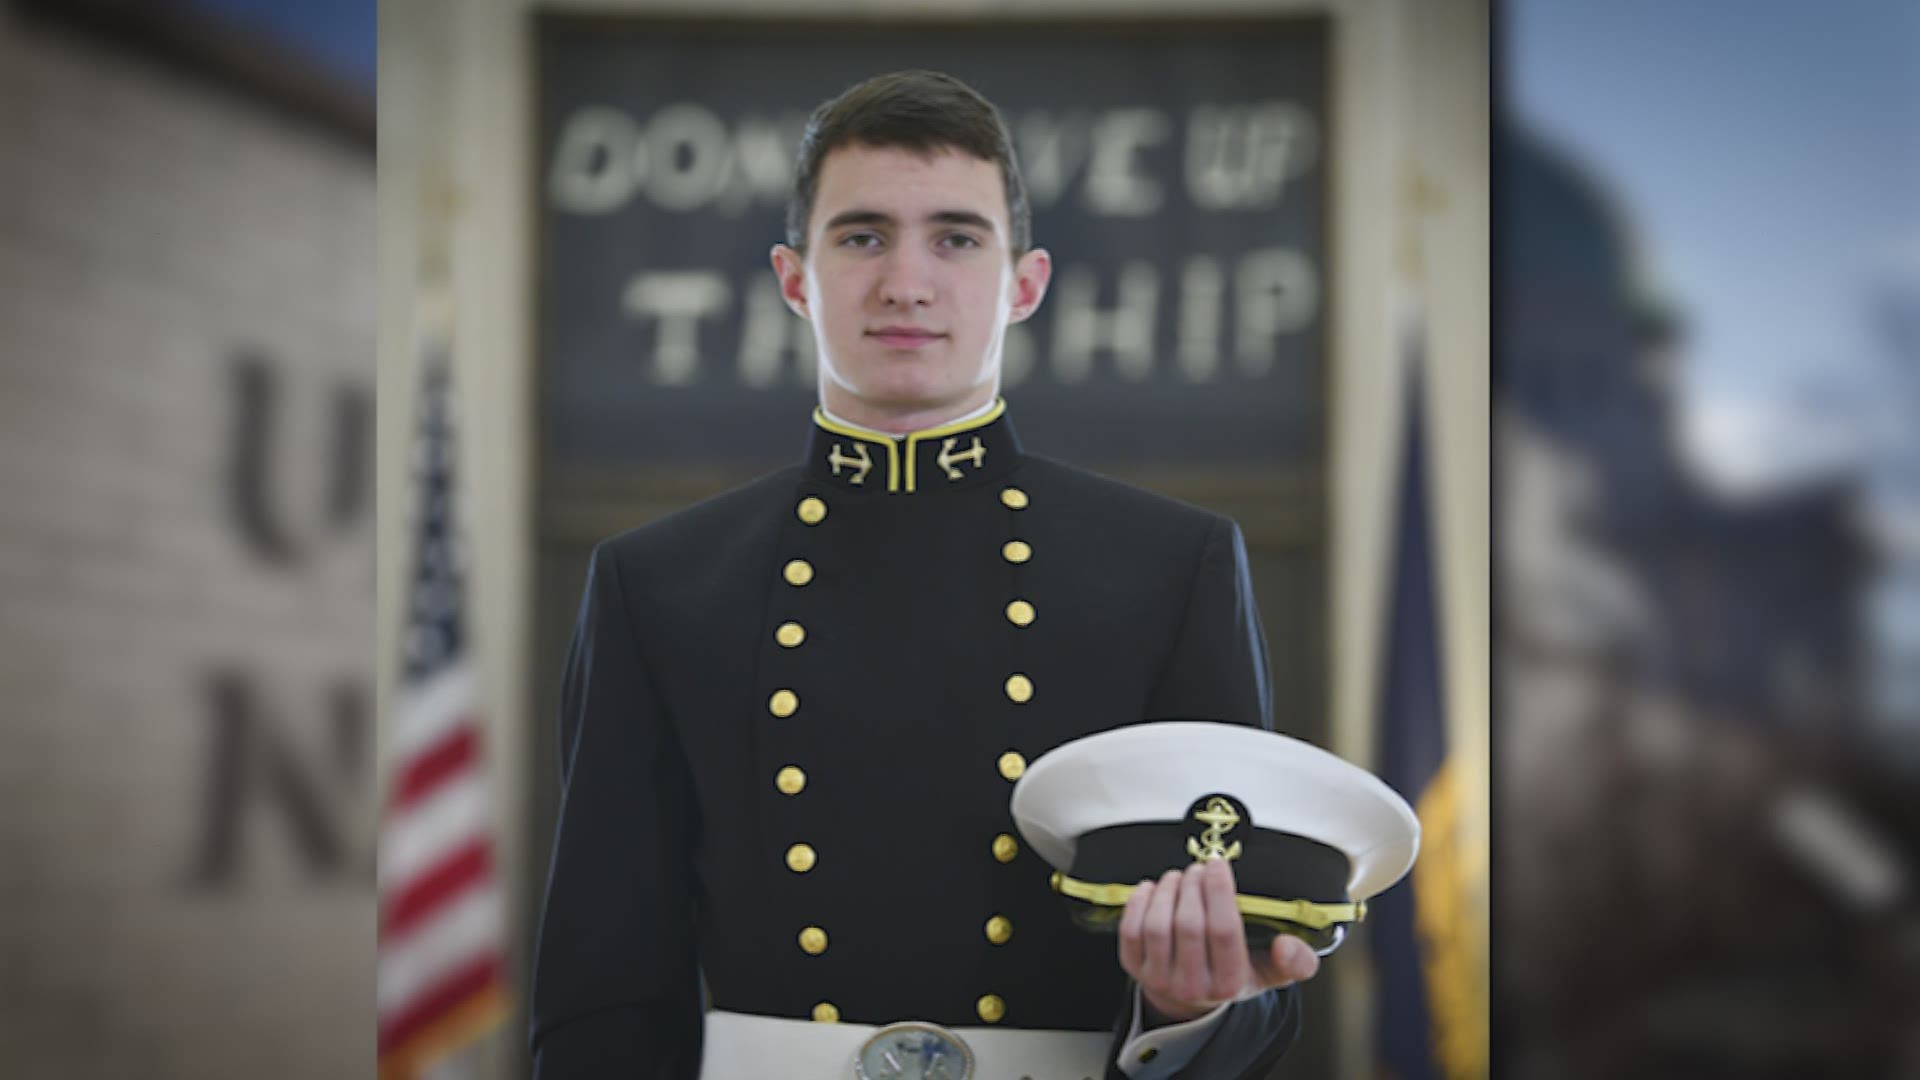 Brendan Corcoran of McKinney credits Carry the Load and its collaboration with the Boy Scouts for leading him to the U.S. Naval Academy.